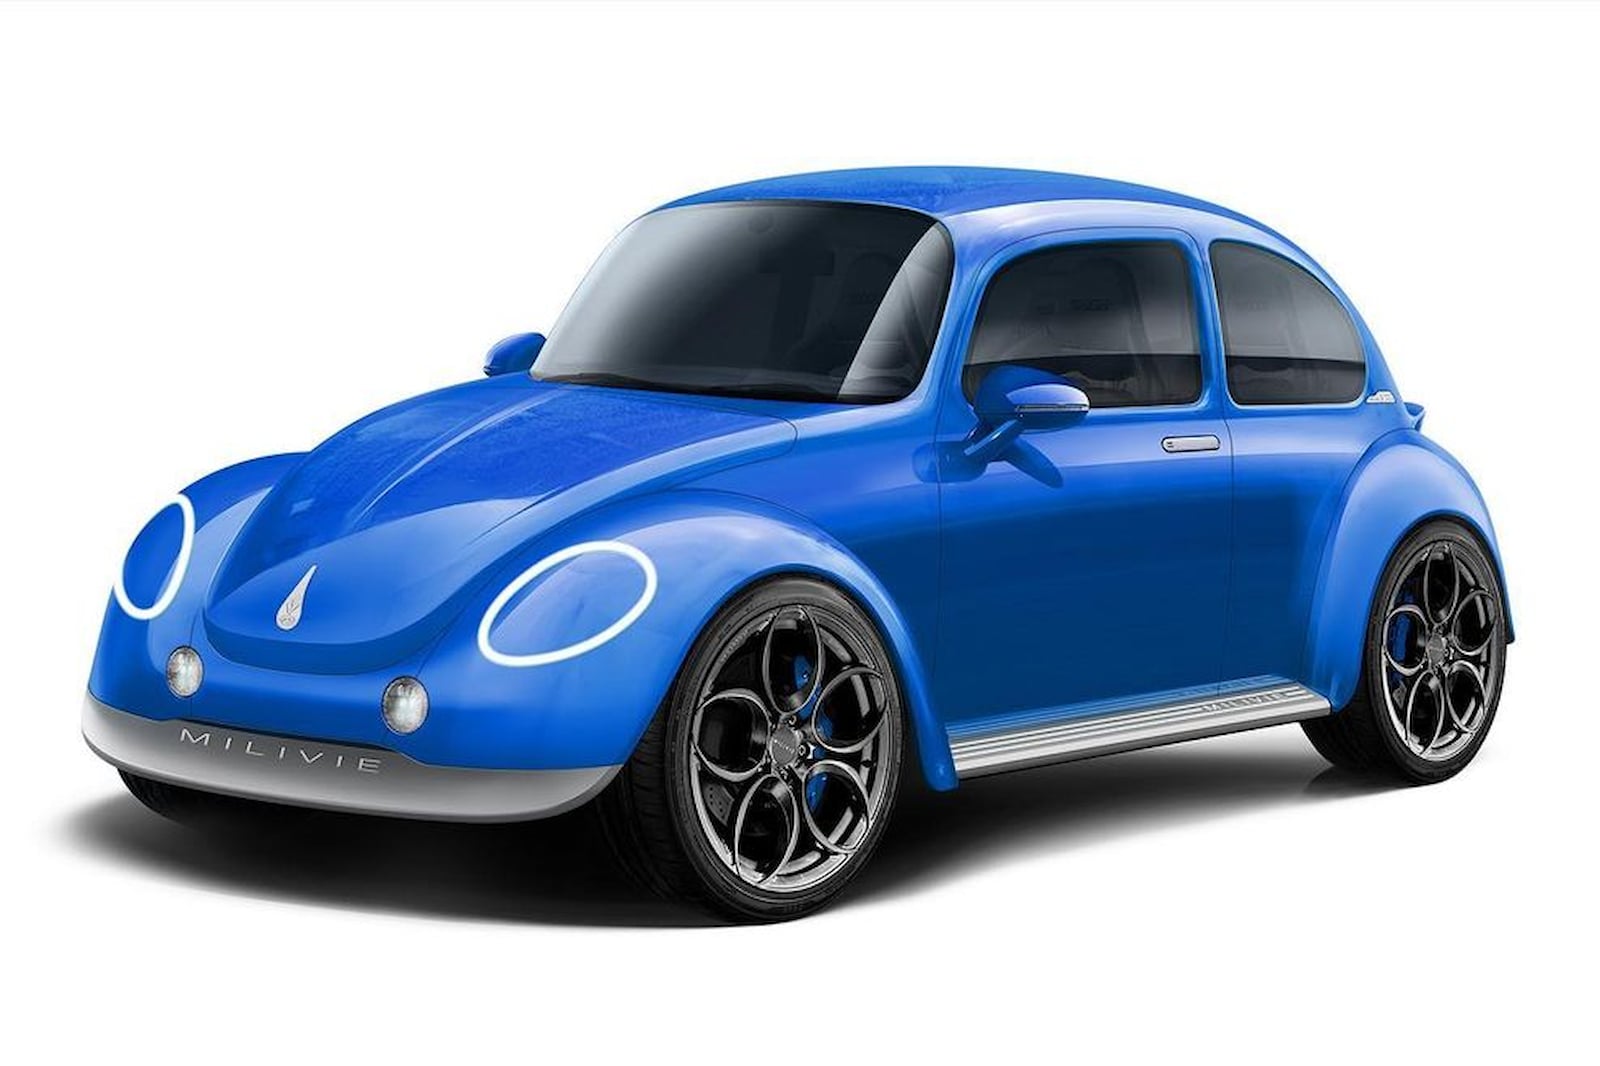 The Volkswagen Beetle costs $600,000 now. Here's why